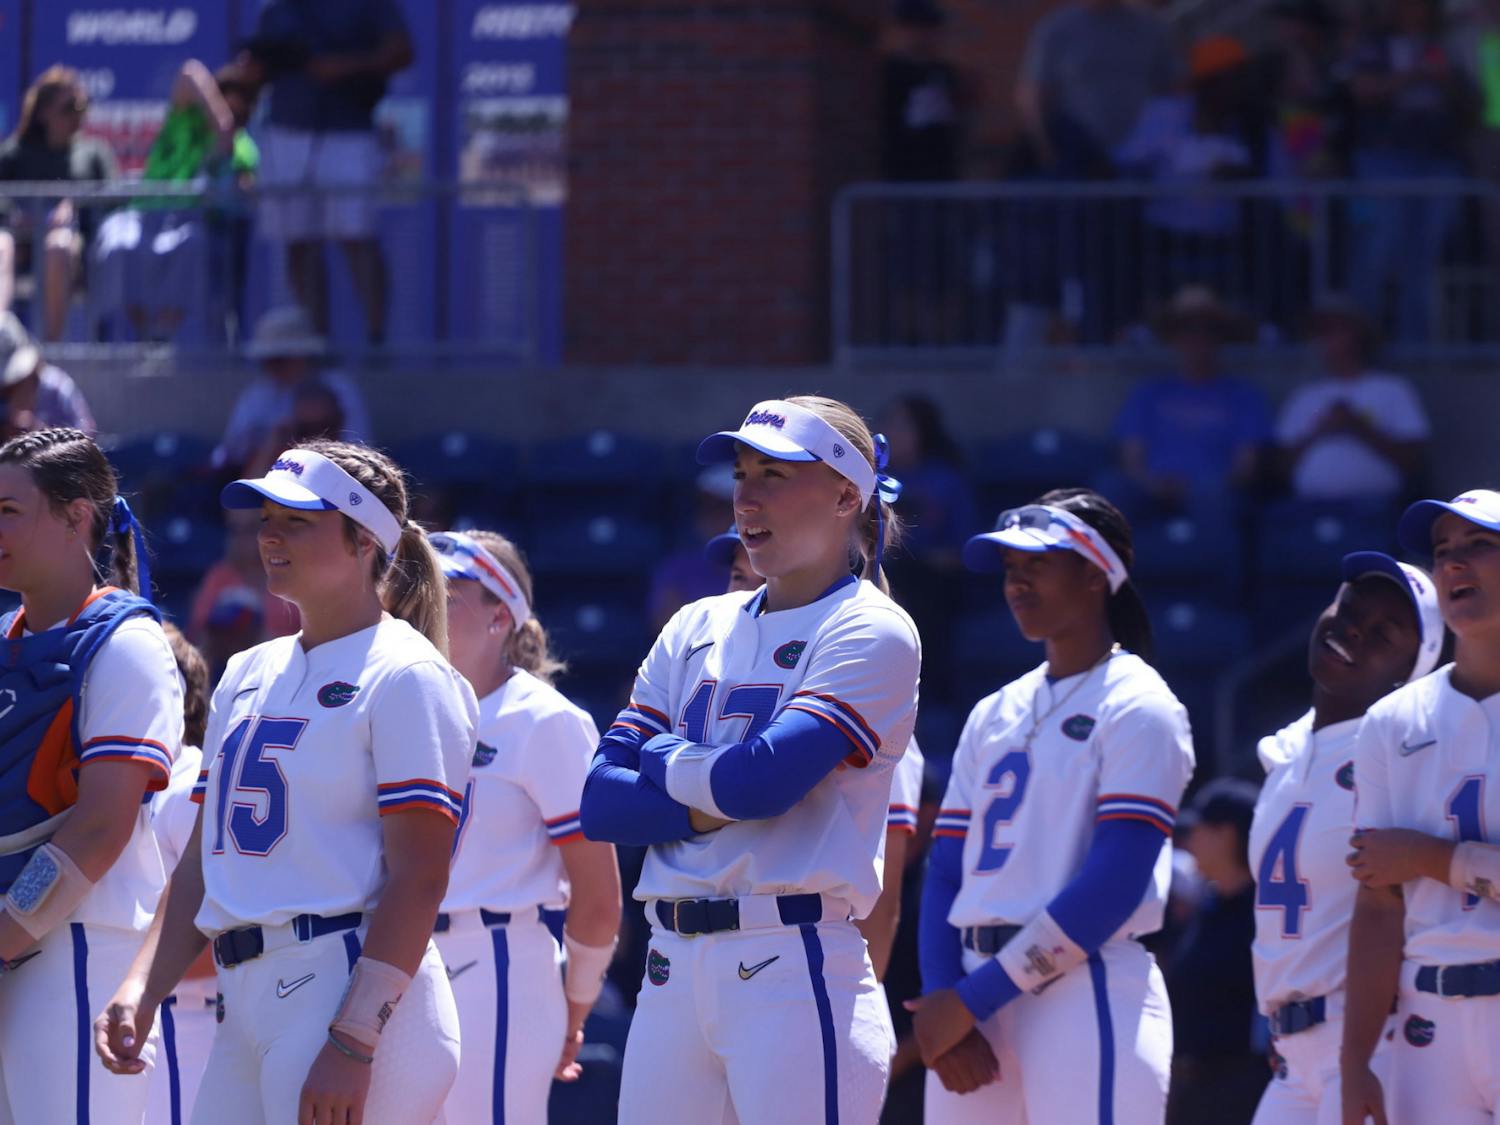 The Florida Gators fell in game one of their Super Regional against Virginia Tech.